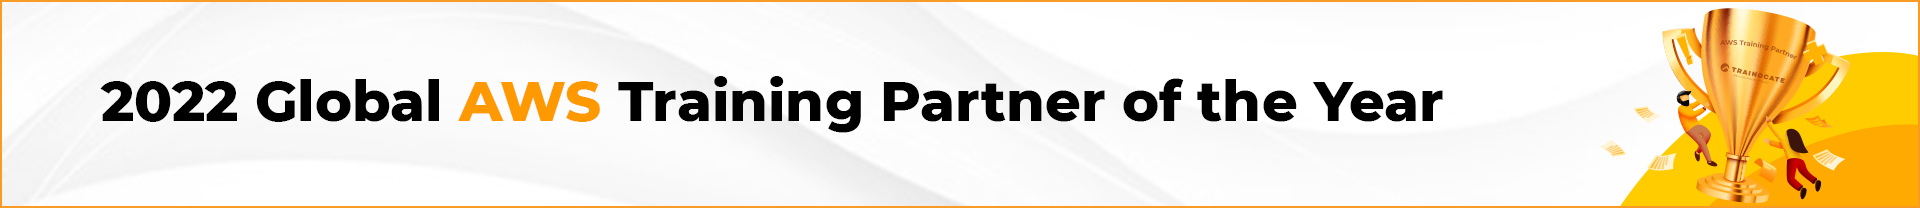 aws global learning partner of the year 2022